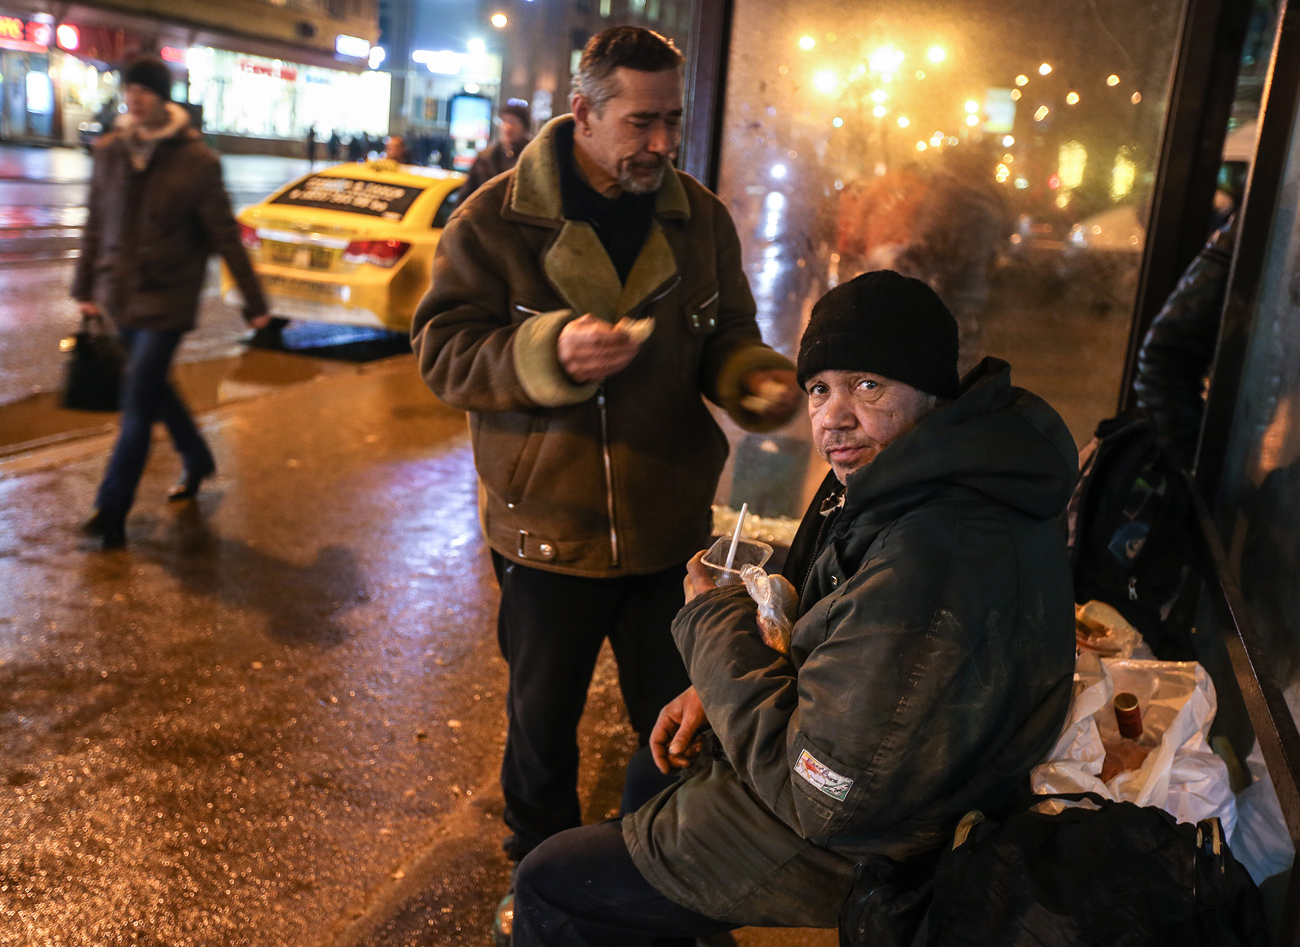 Homeless people seen at a bus stop after receiving food handed out by employees of the Spravedlivaya Pomosch ('Just Aid') Fund.